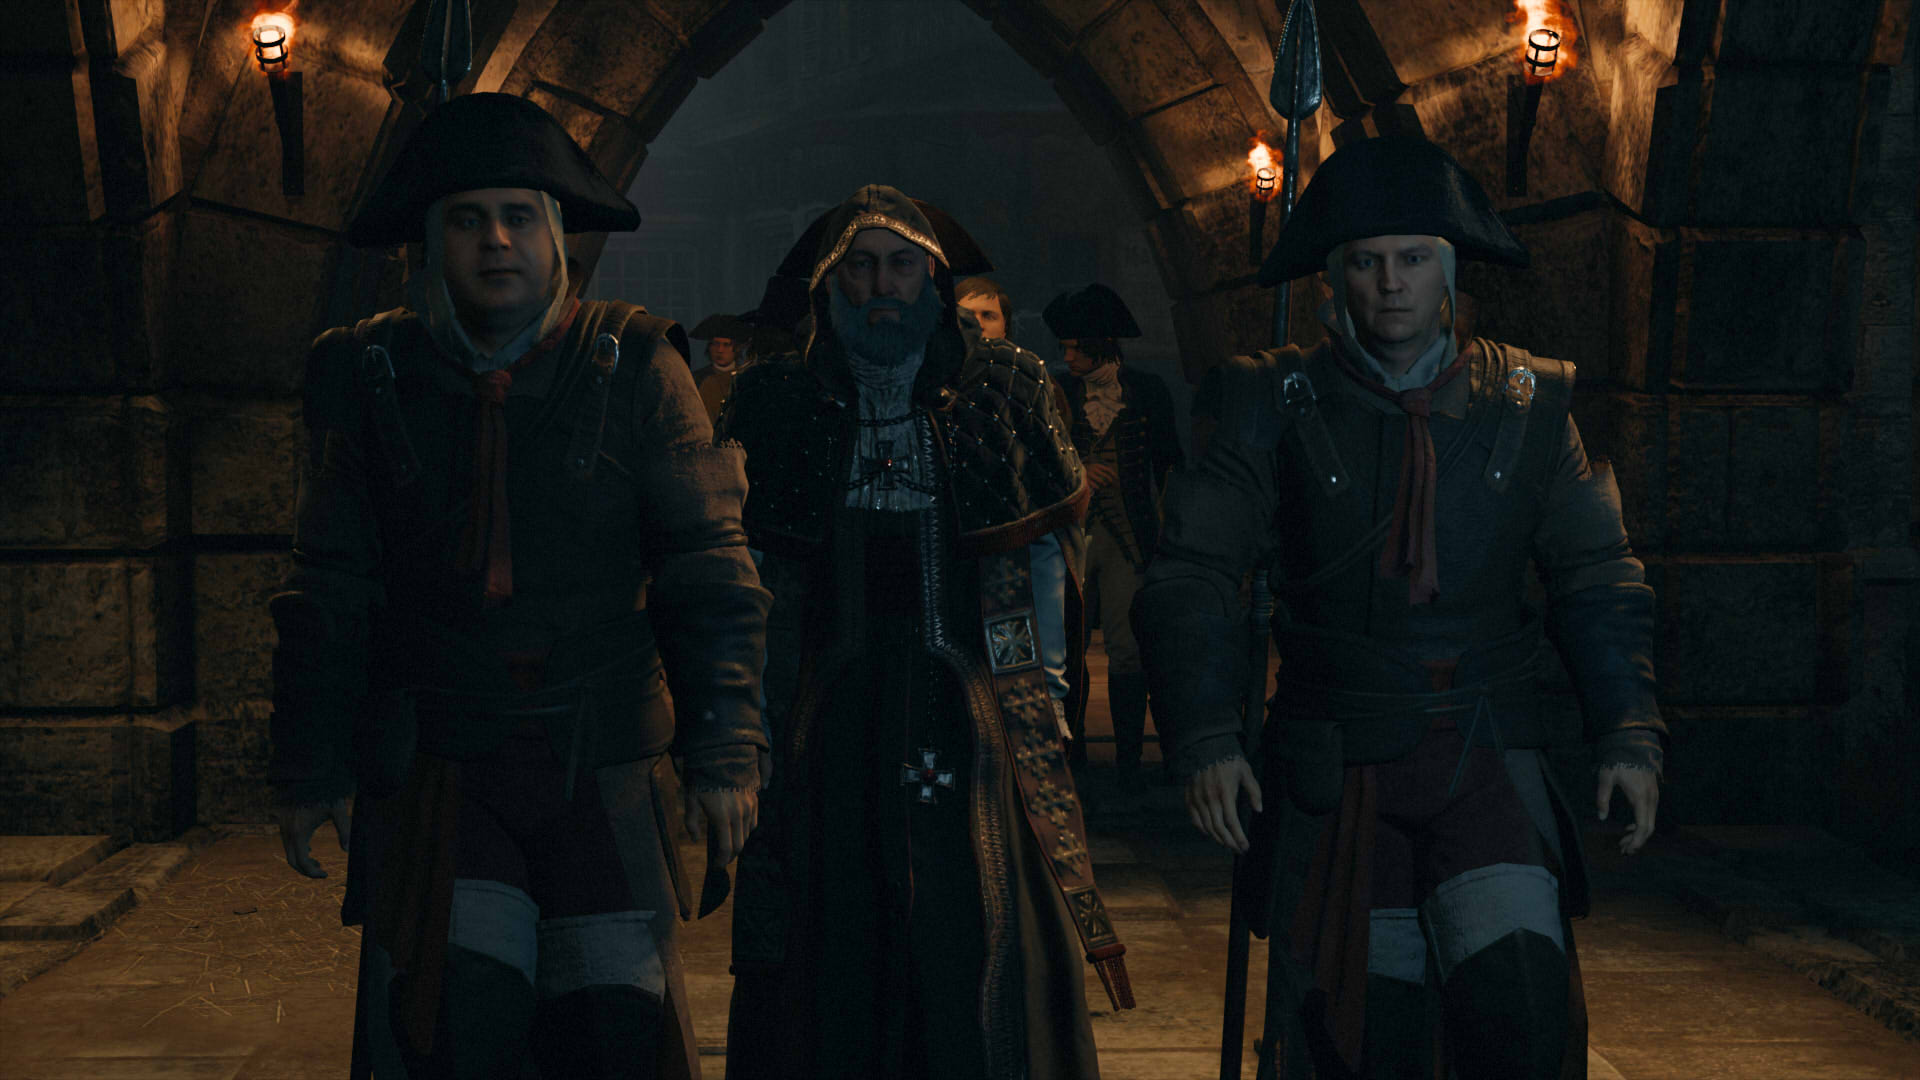 Assassin's Creed: Unity guide - Sequence 5 Memory 3: The Prophet -  Assassinate Lafreniere